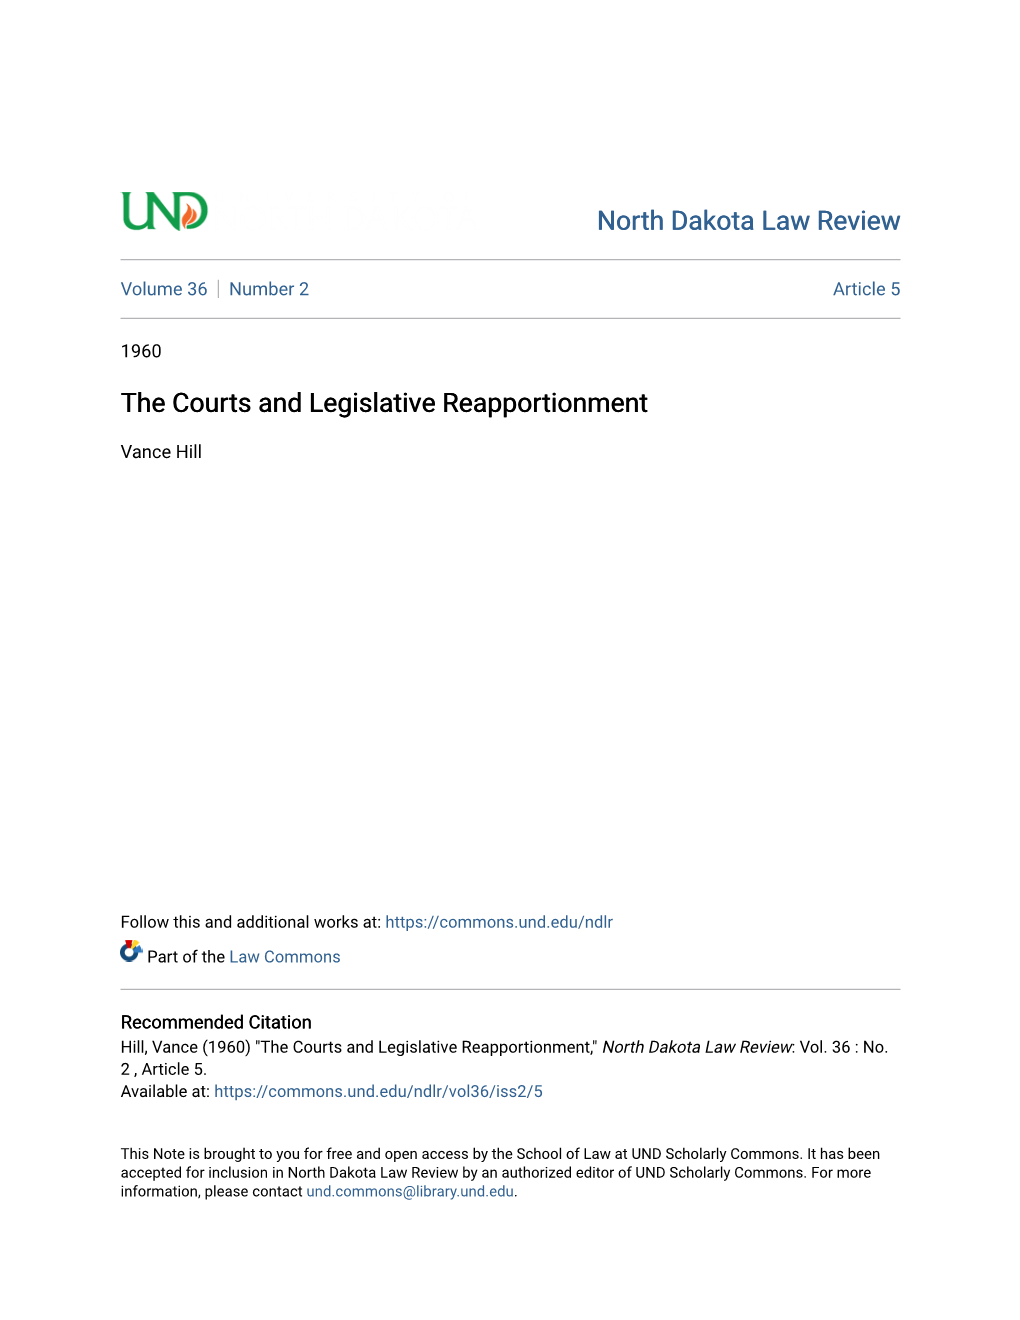 The Courts and Legislative Reapportionment